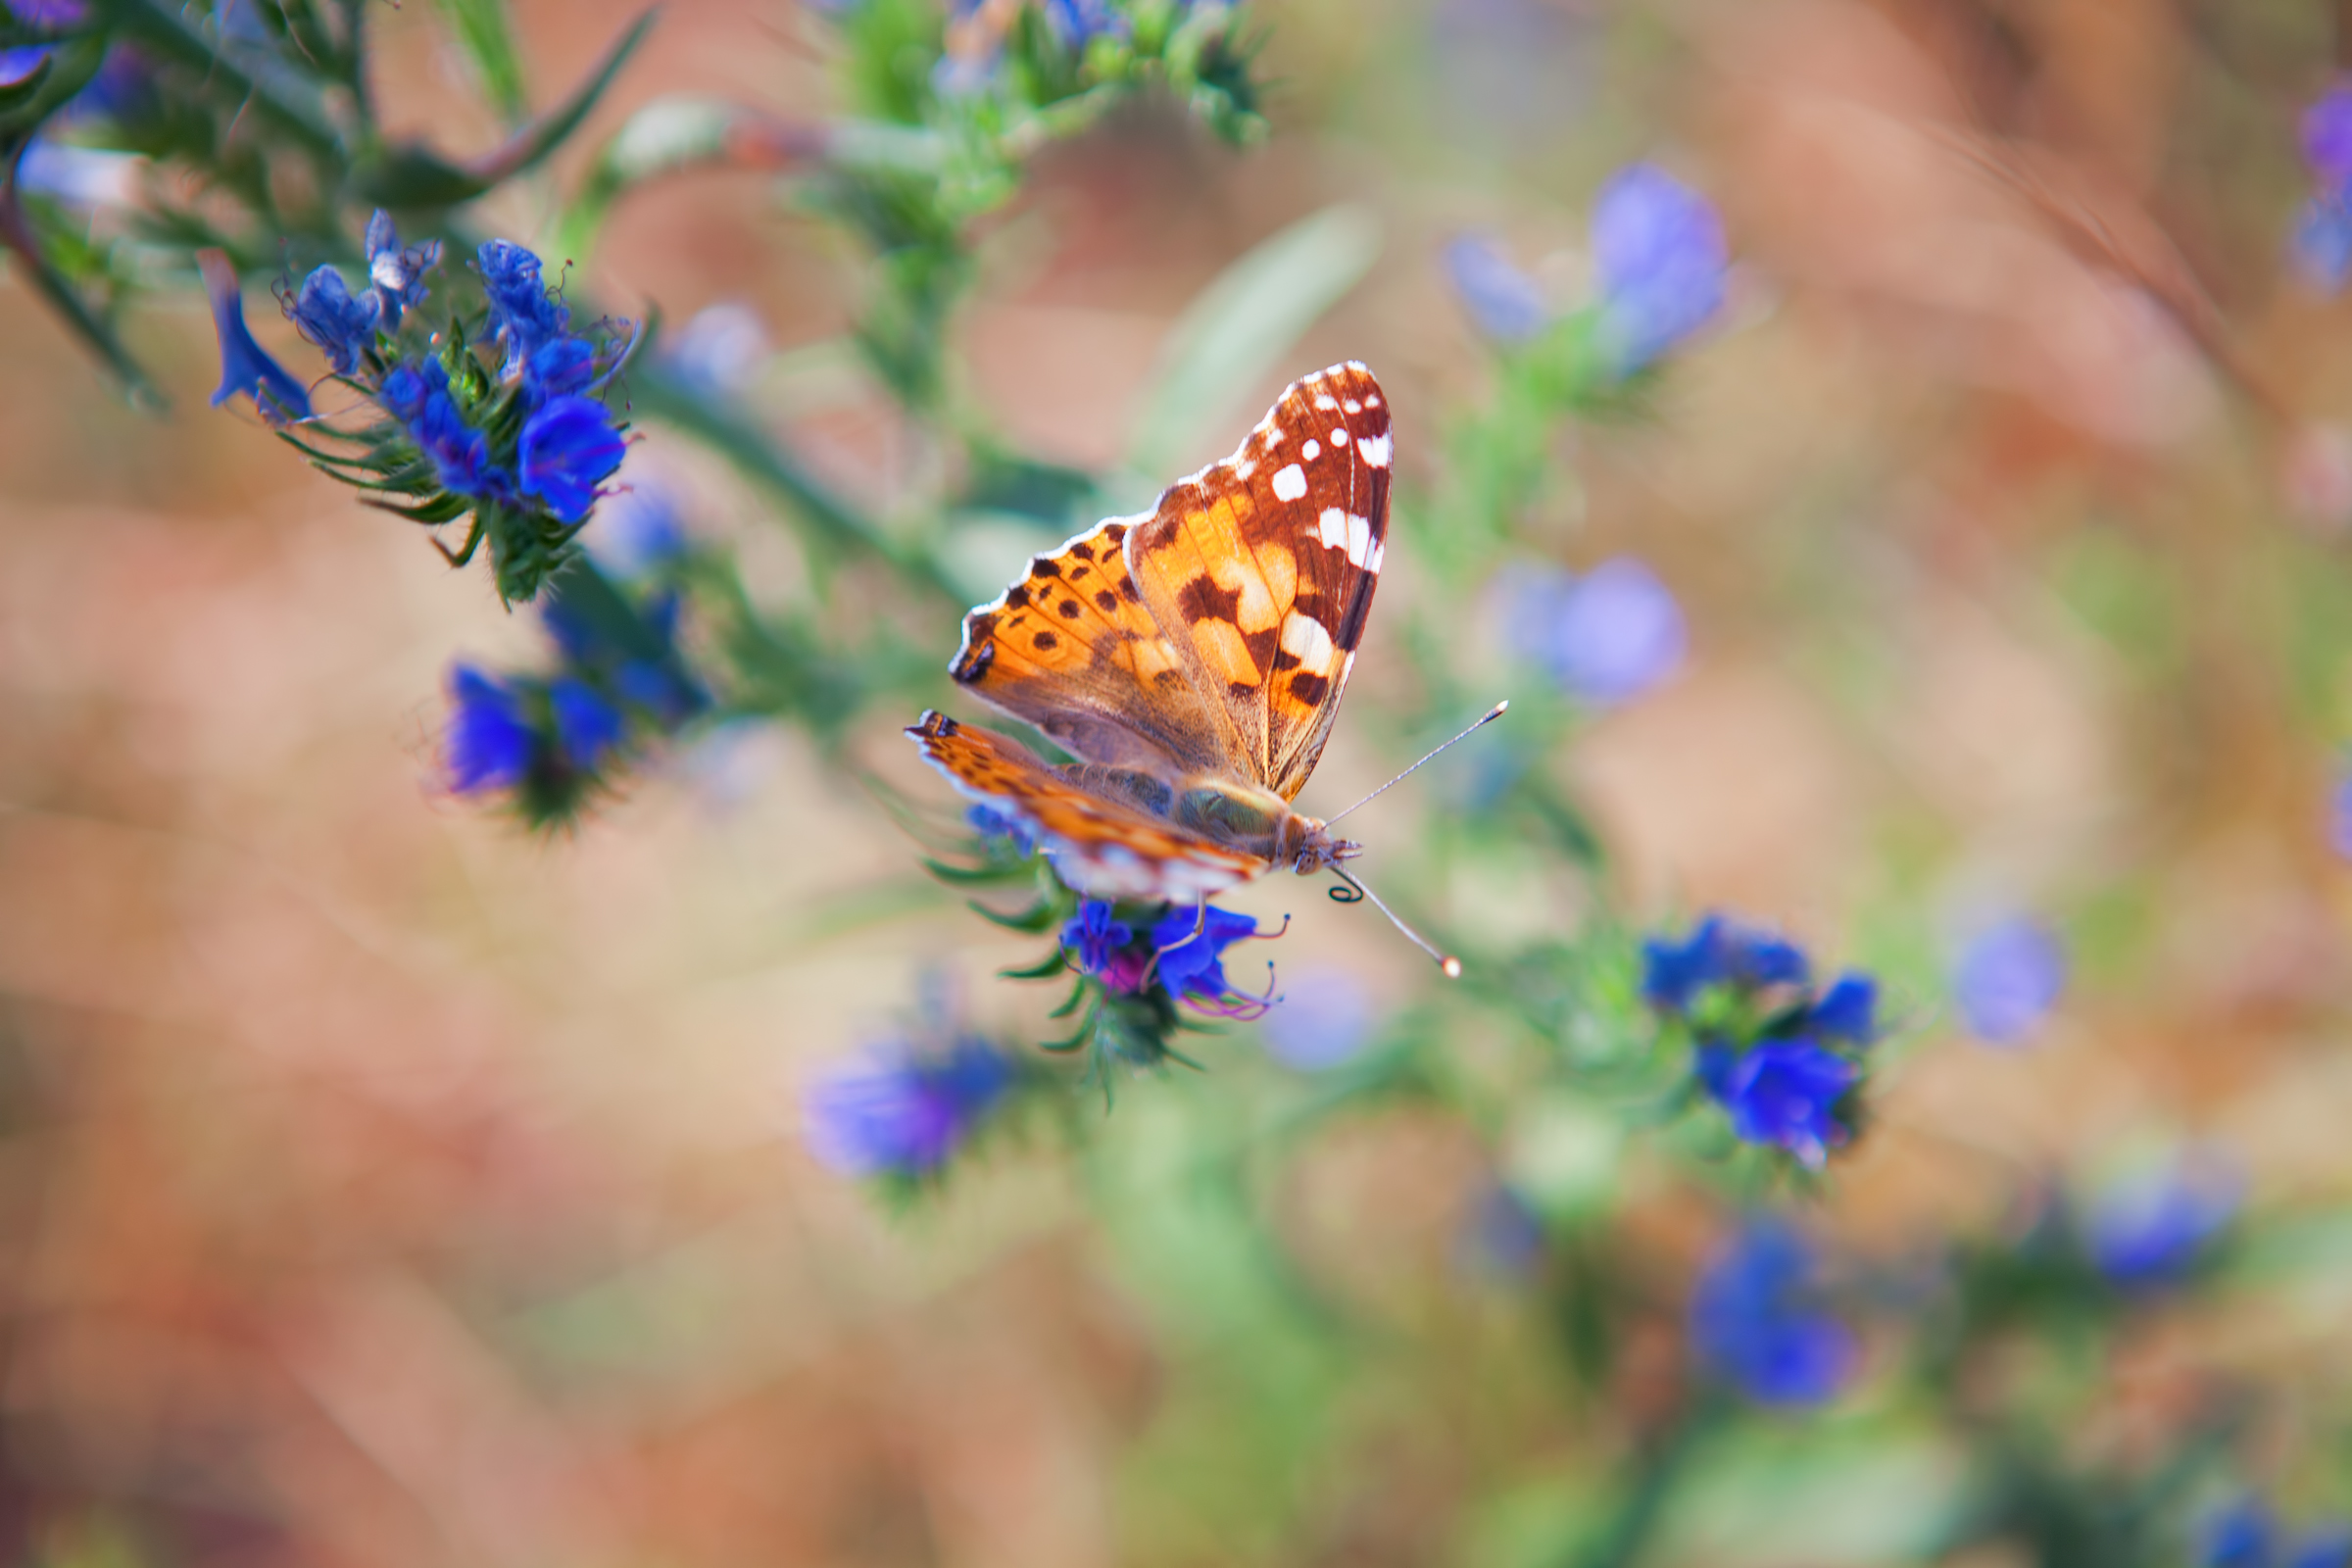 Butterfly on the flower, Animal, Green, Summer, Spring, HQ Photo